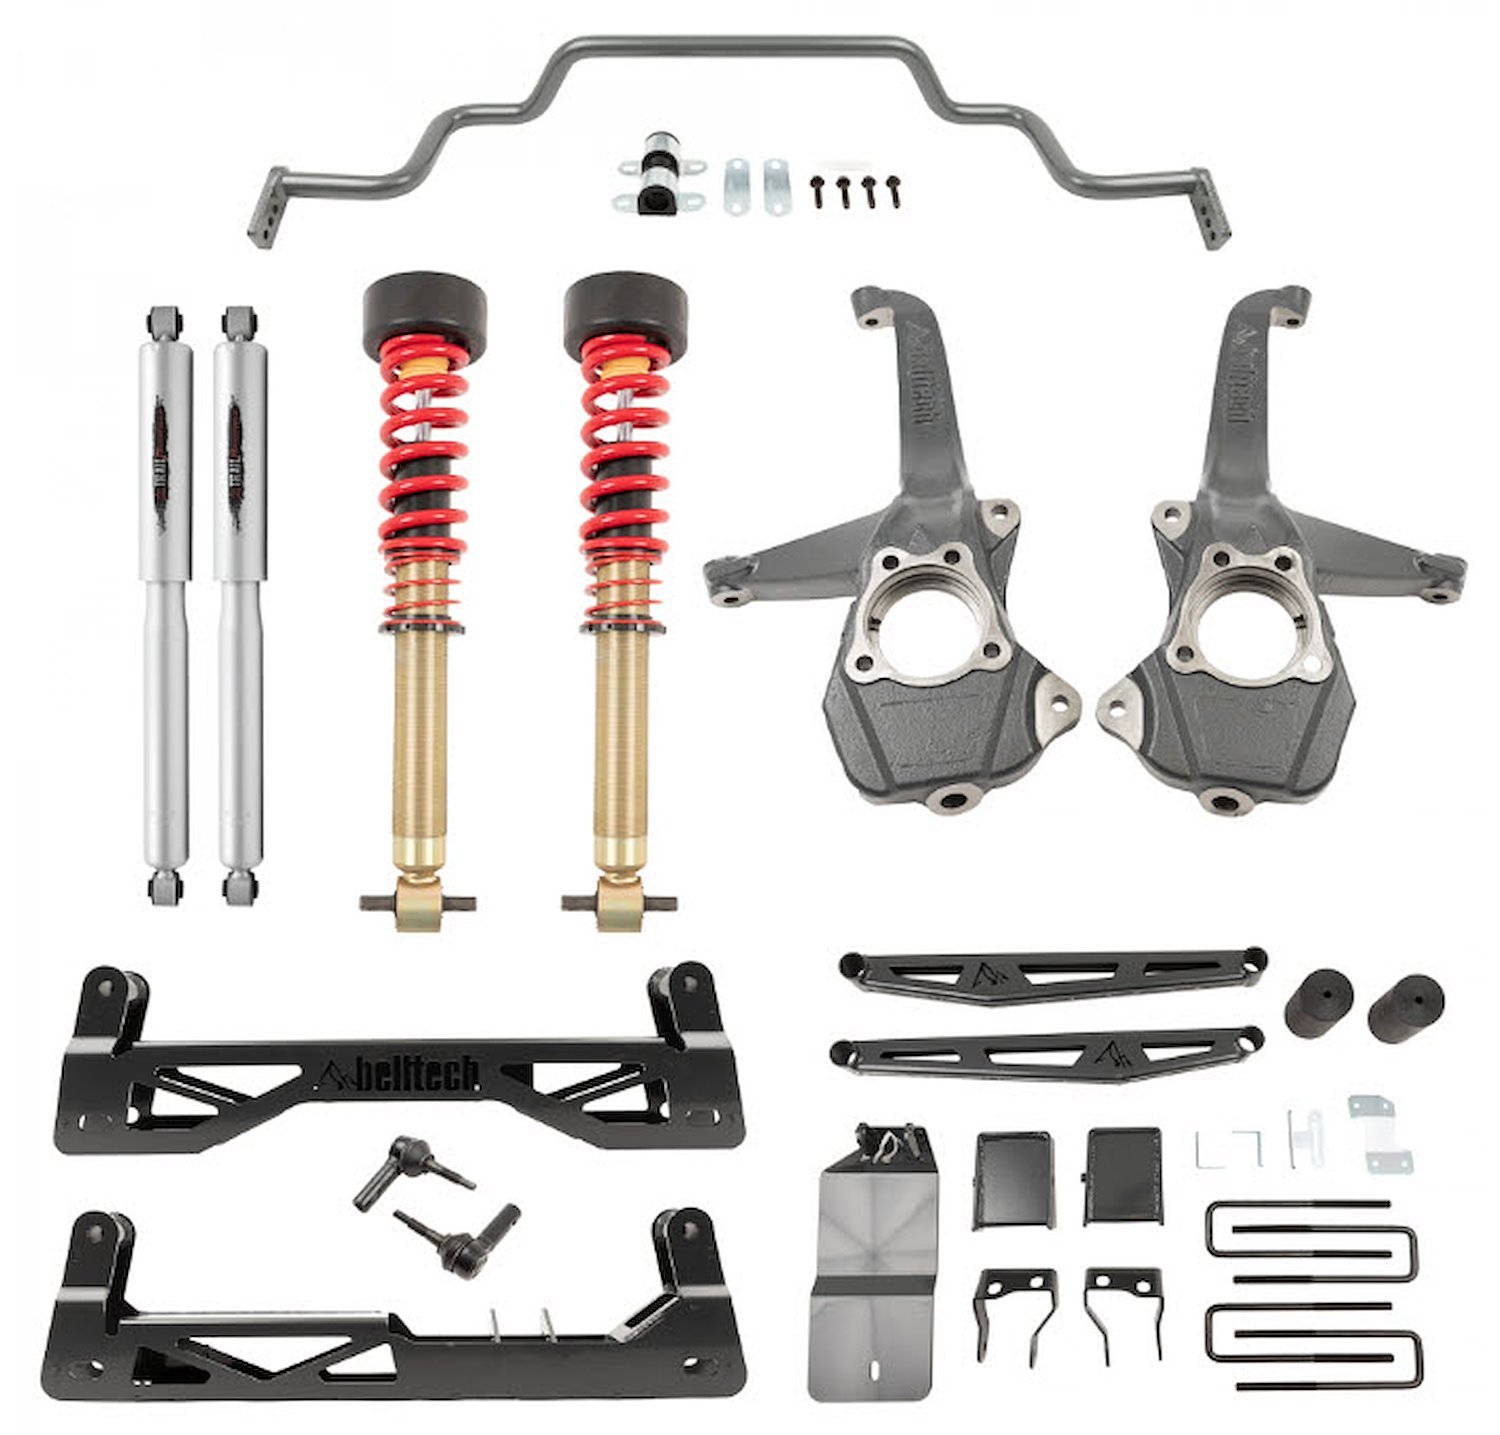 150210HK 6-8 in. Suspension Lift Kit Fits Select GM 1500 Trucks 2WD/4WD [w/Front Coil-Overs, Rear Shocks & Front Sway Bar]